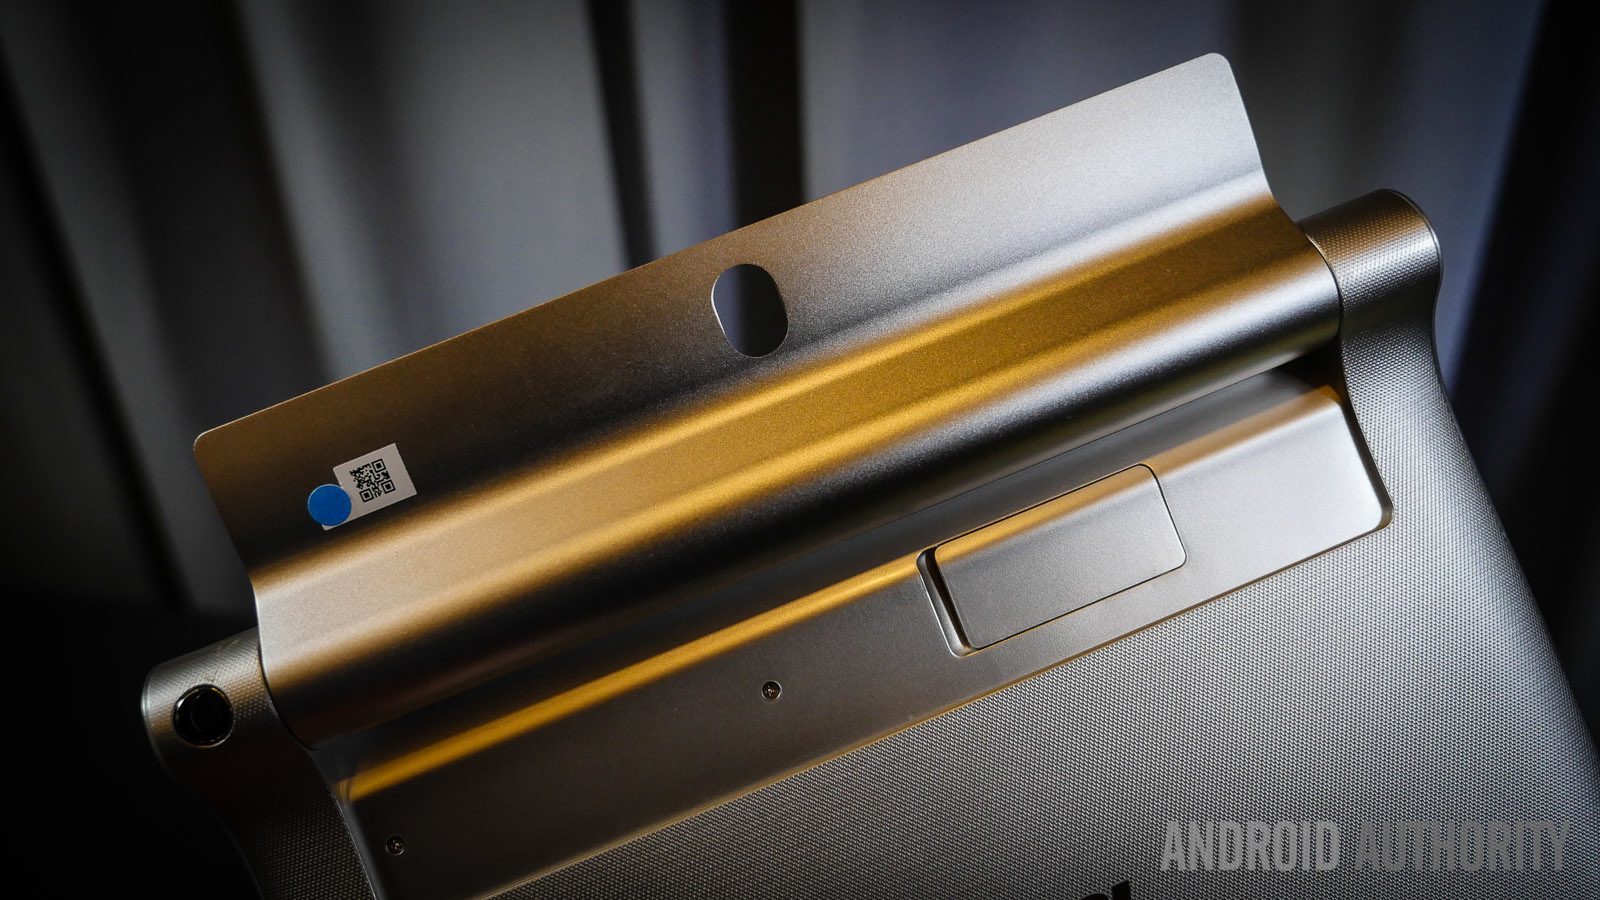 lenovo yoga tablet 2 8 and 10 first look aa (13 of 24)